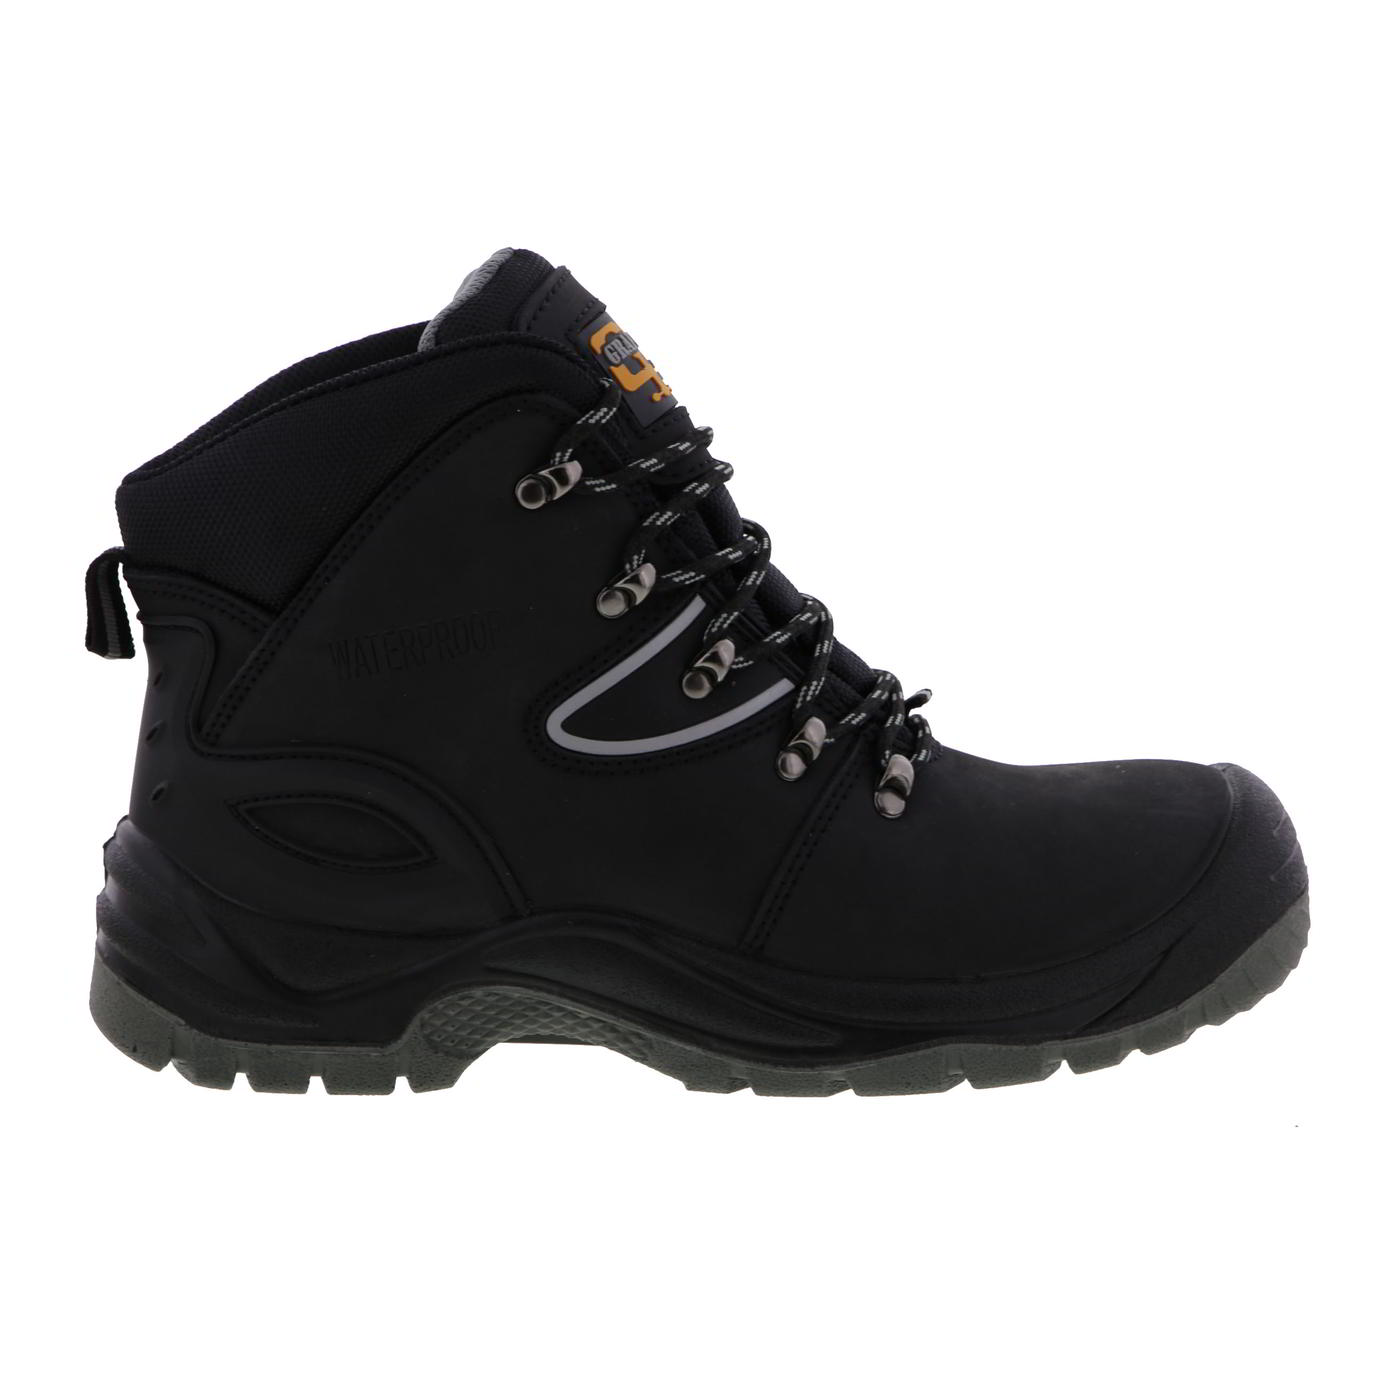 grafters mens m330a waterproof steel toe safety boots - uk 14 / eu 48